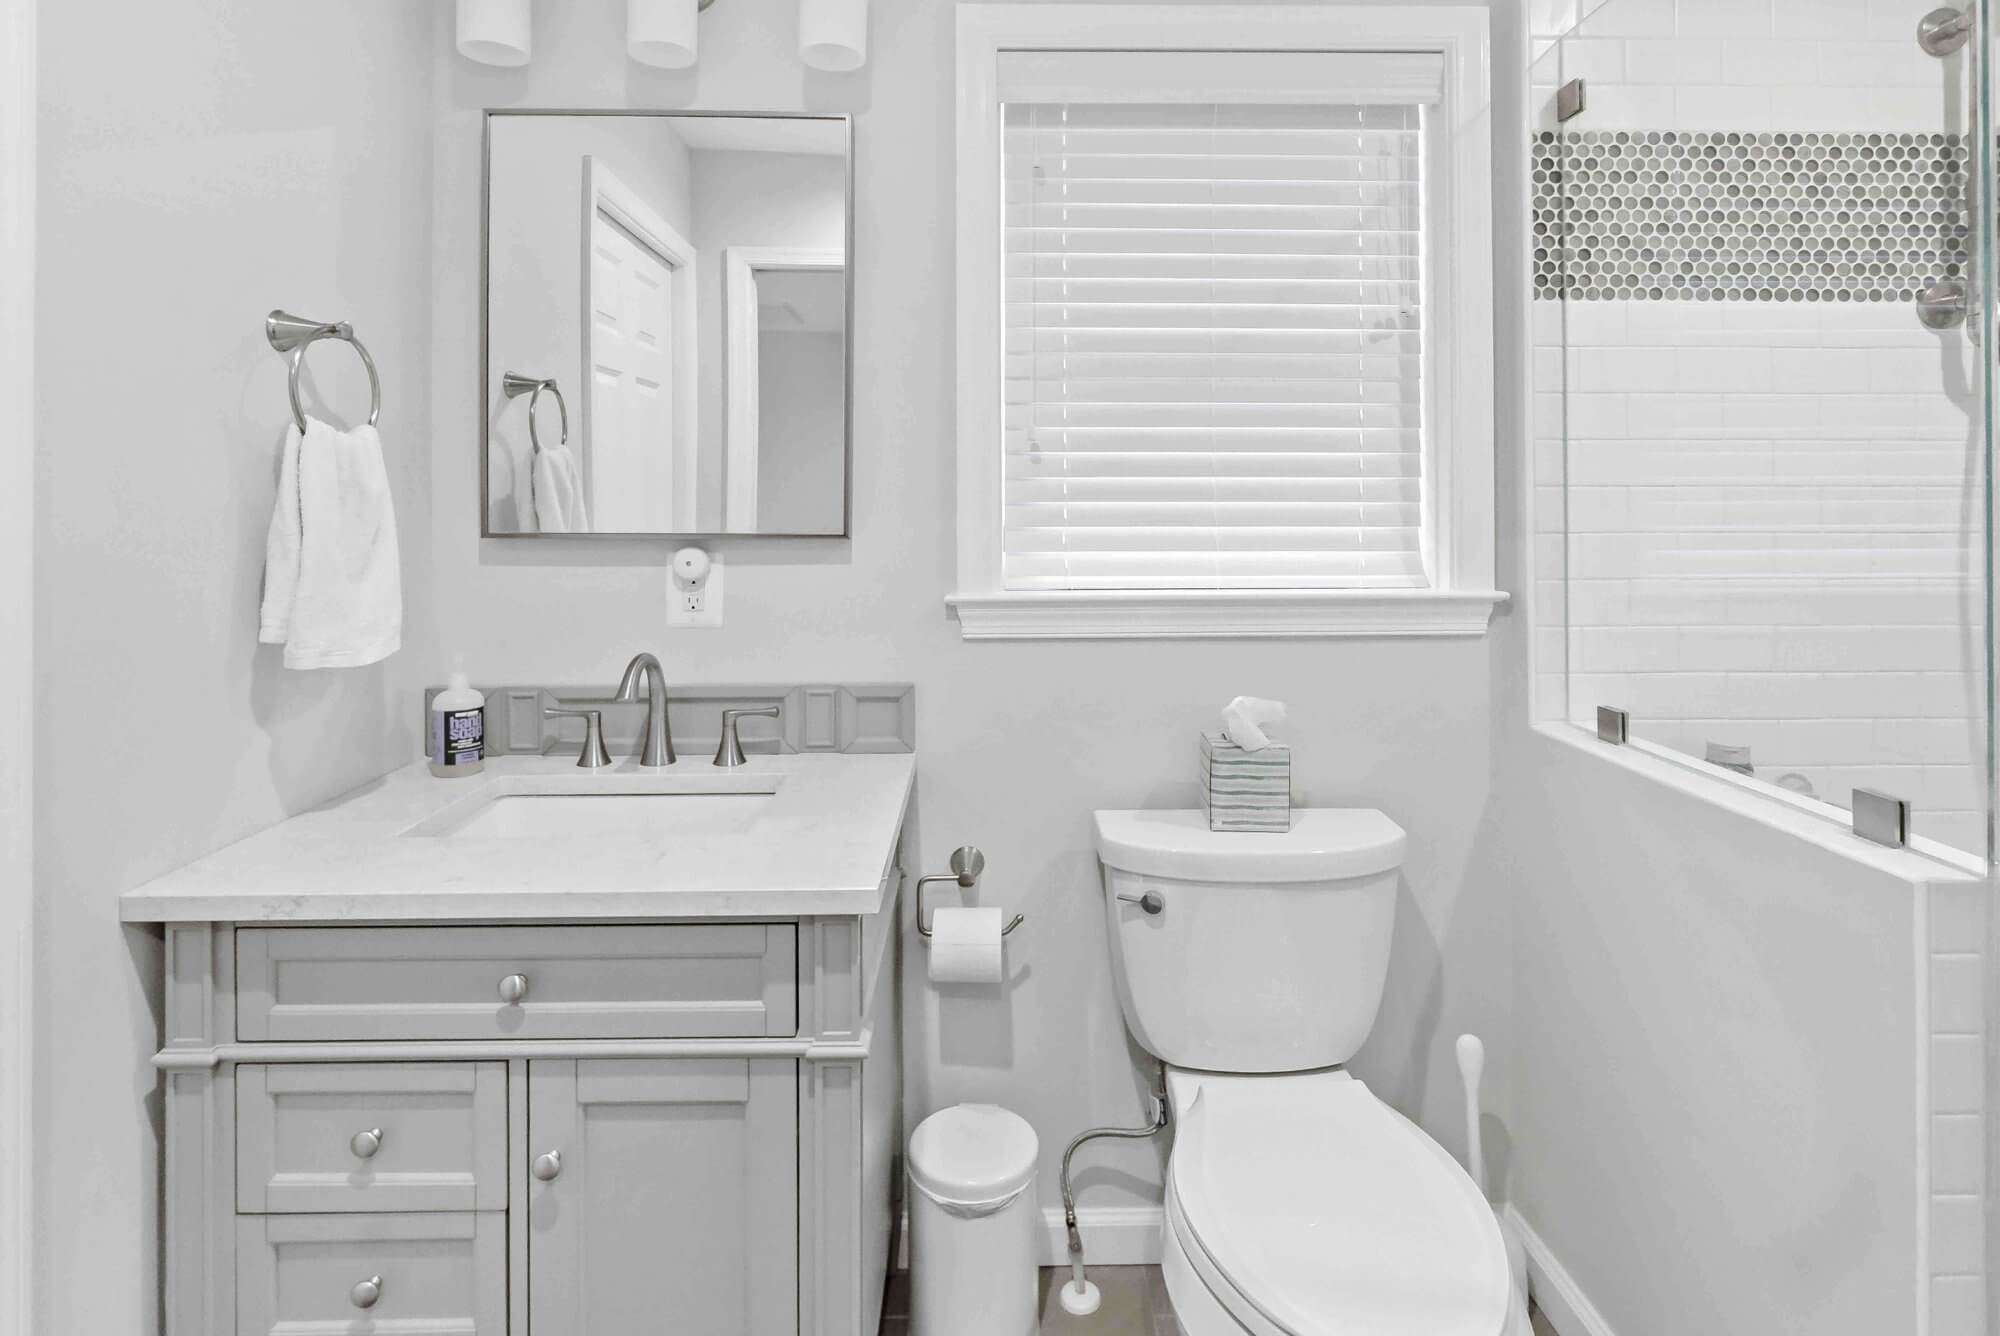 Clean white bathroom with one sink and vanity